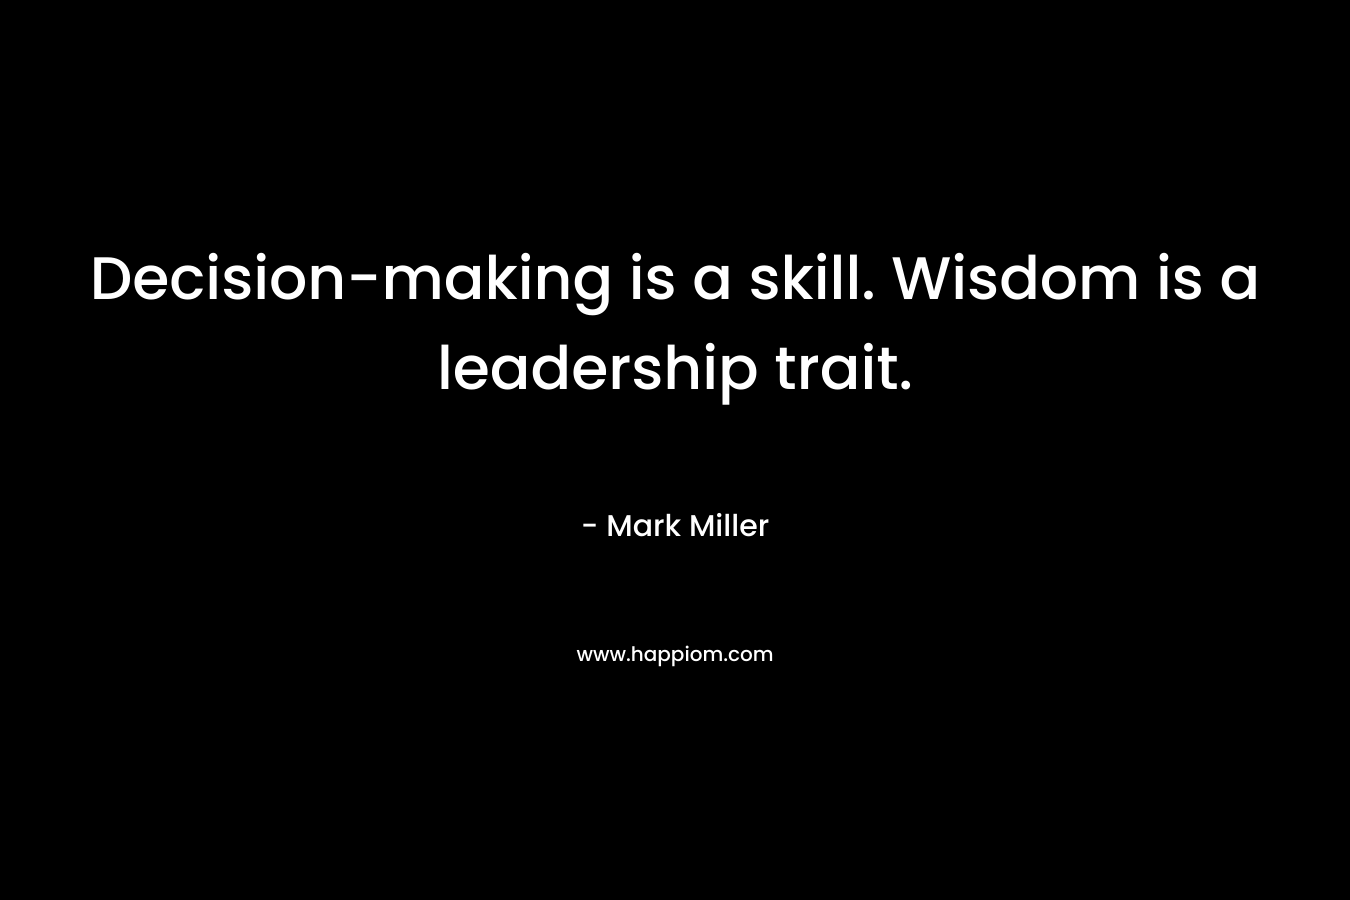 Decision-making is a skill. Wisdom is a leadership trait.